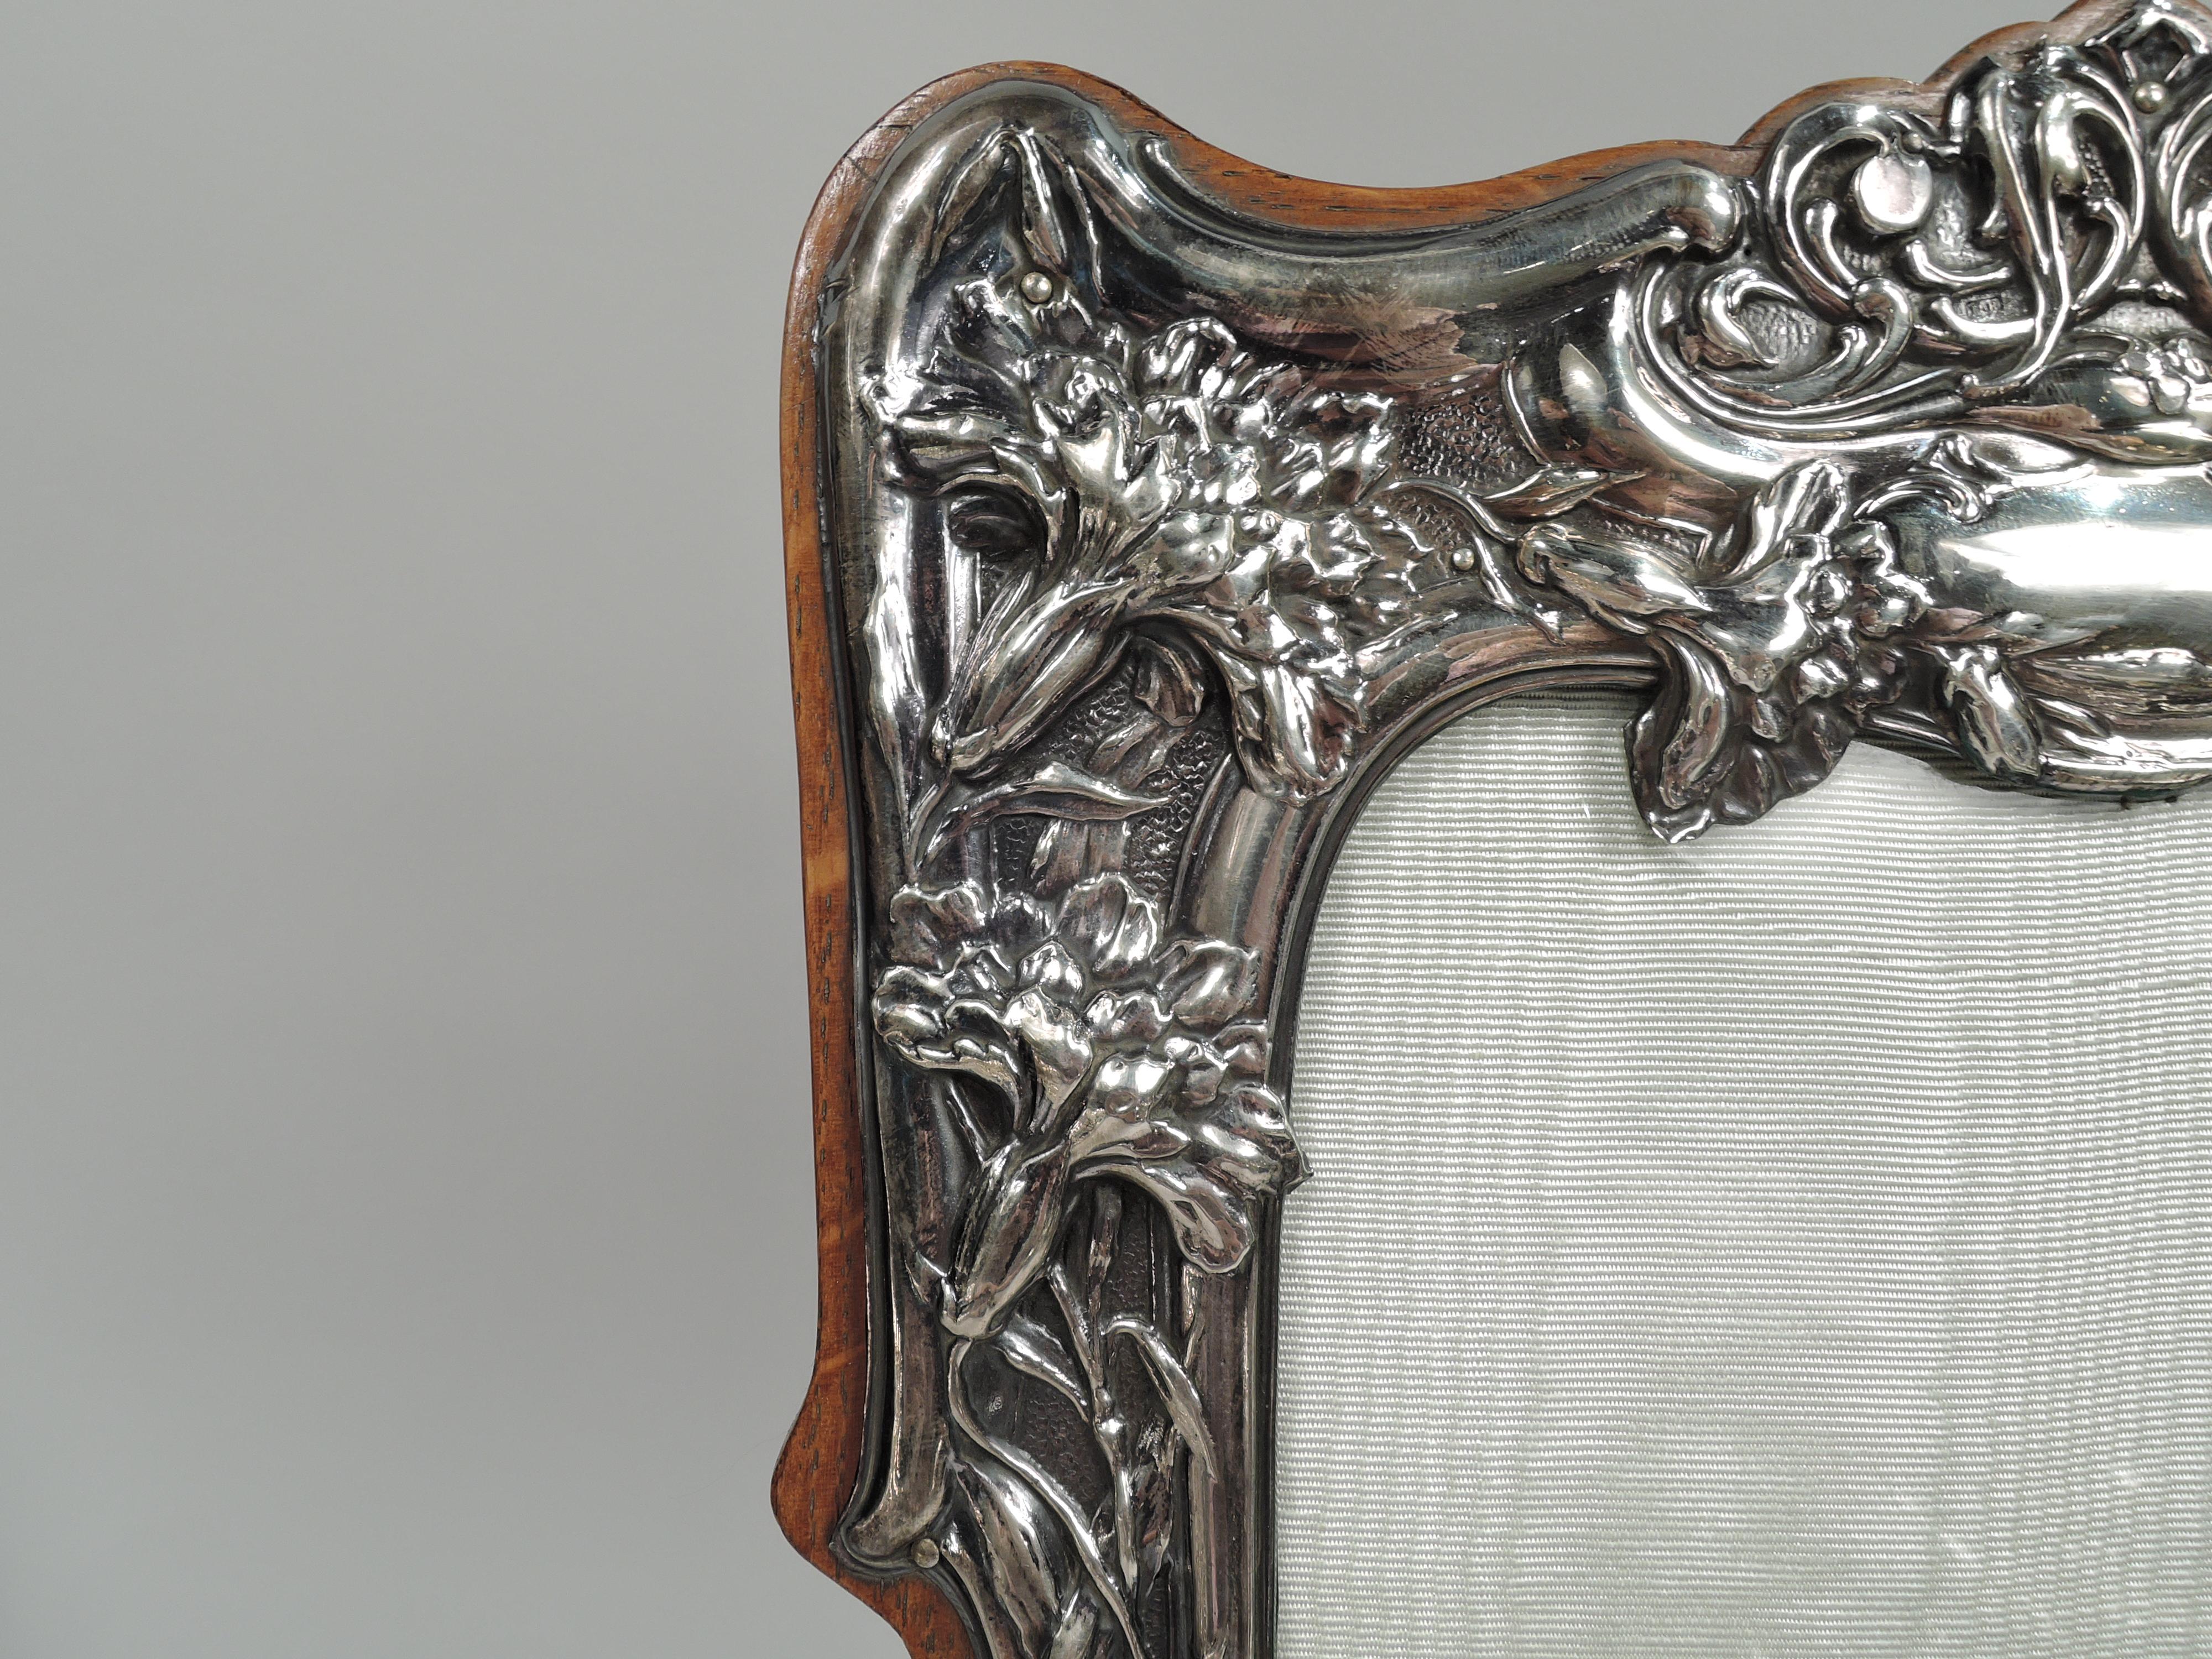 Edwardian Art Nouveau sterling silver picture frame, 1904. Shaped rectangular window in shaped surround with bracket feet. Chased ornament: Entwined tendrils and flower heads spilling over molded border and scallop shells surrounded by dynamic